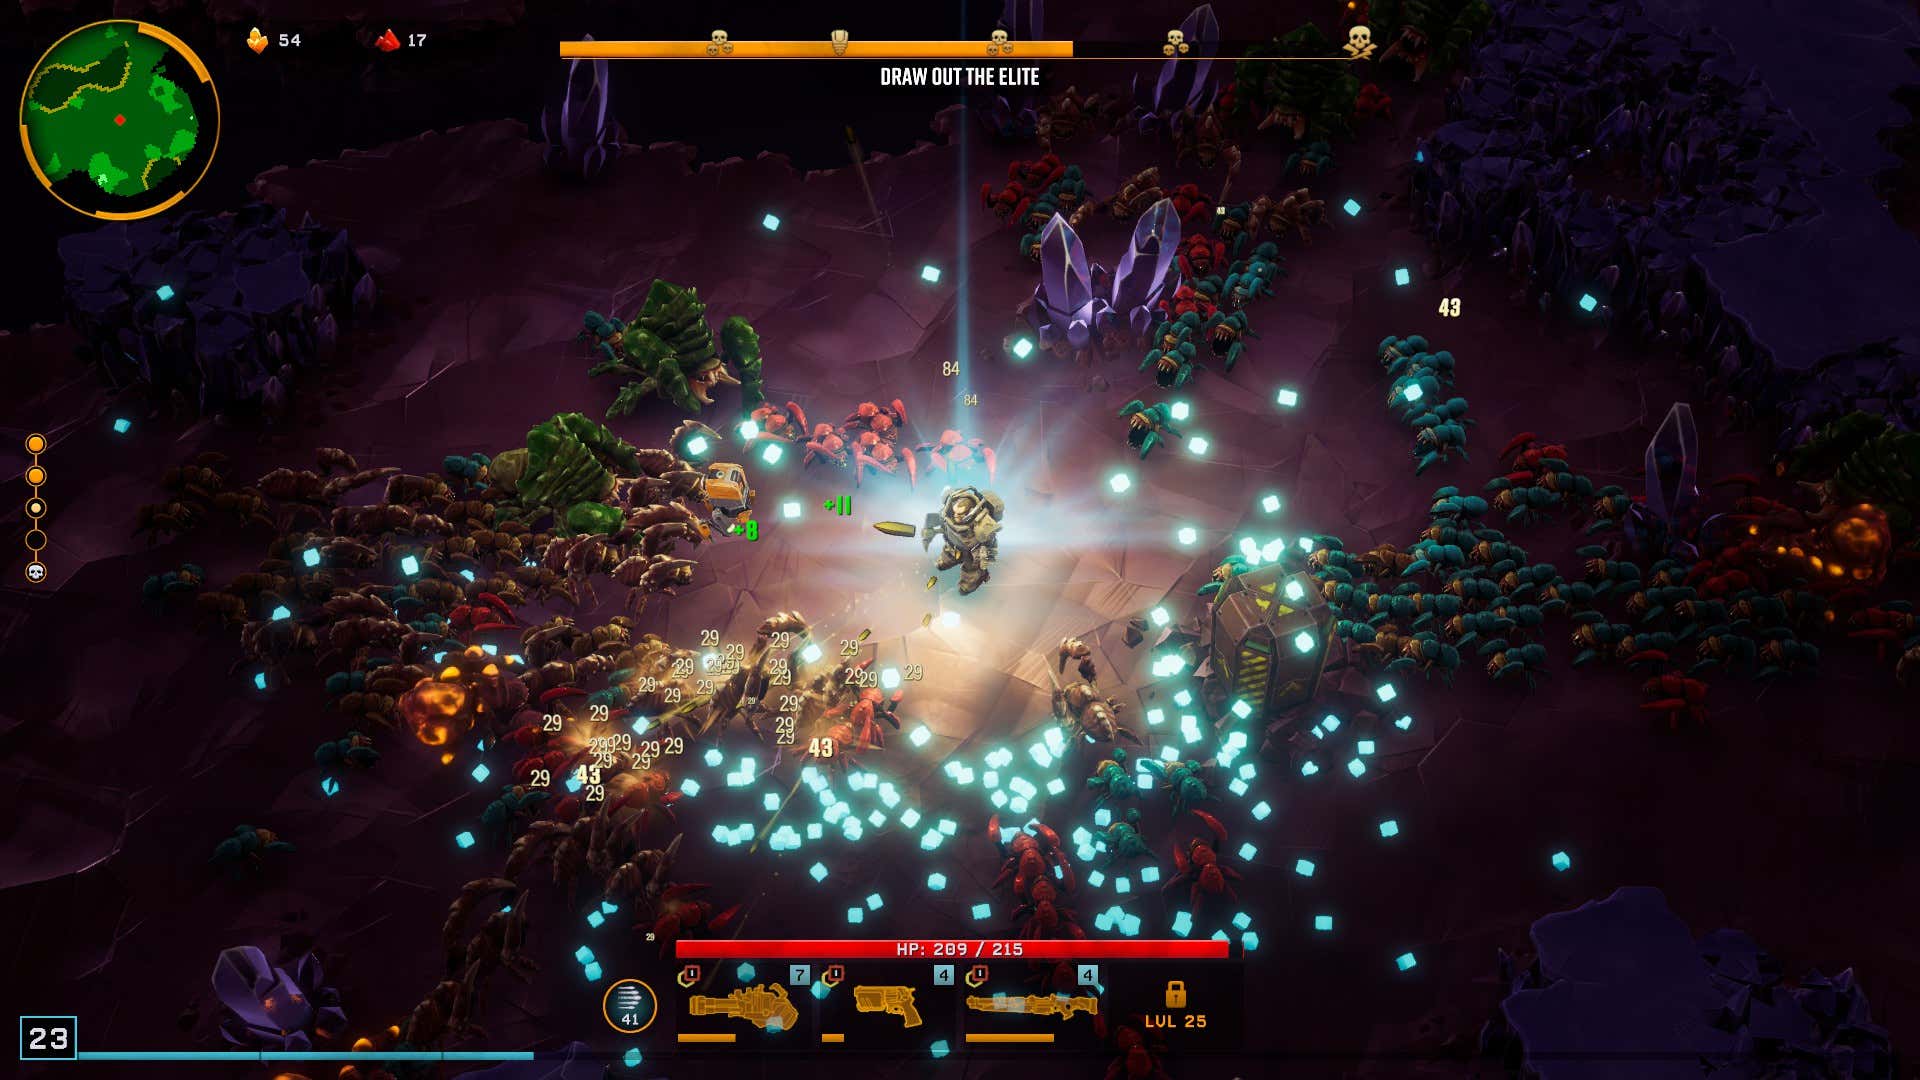 A screenshot shows a dwarf in the game, surrounded by enemies and XP. 